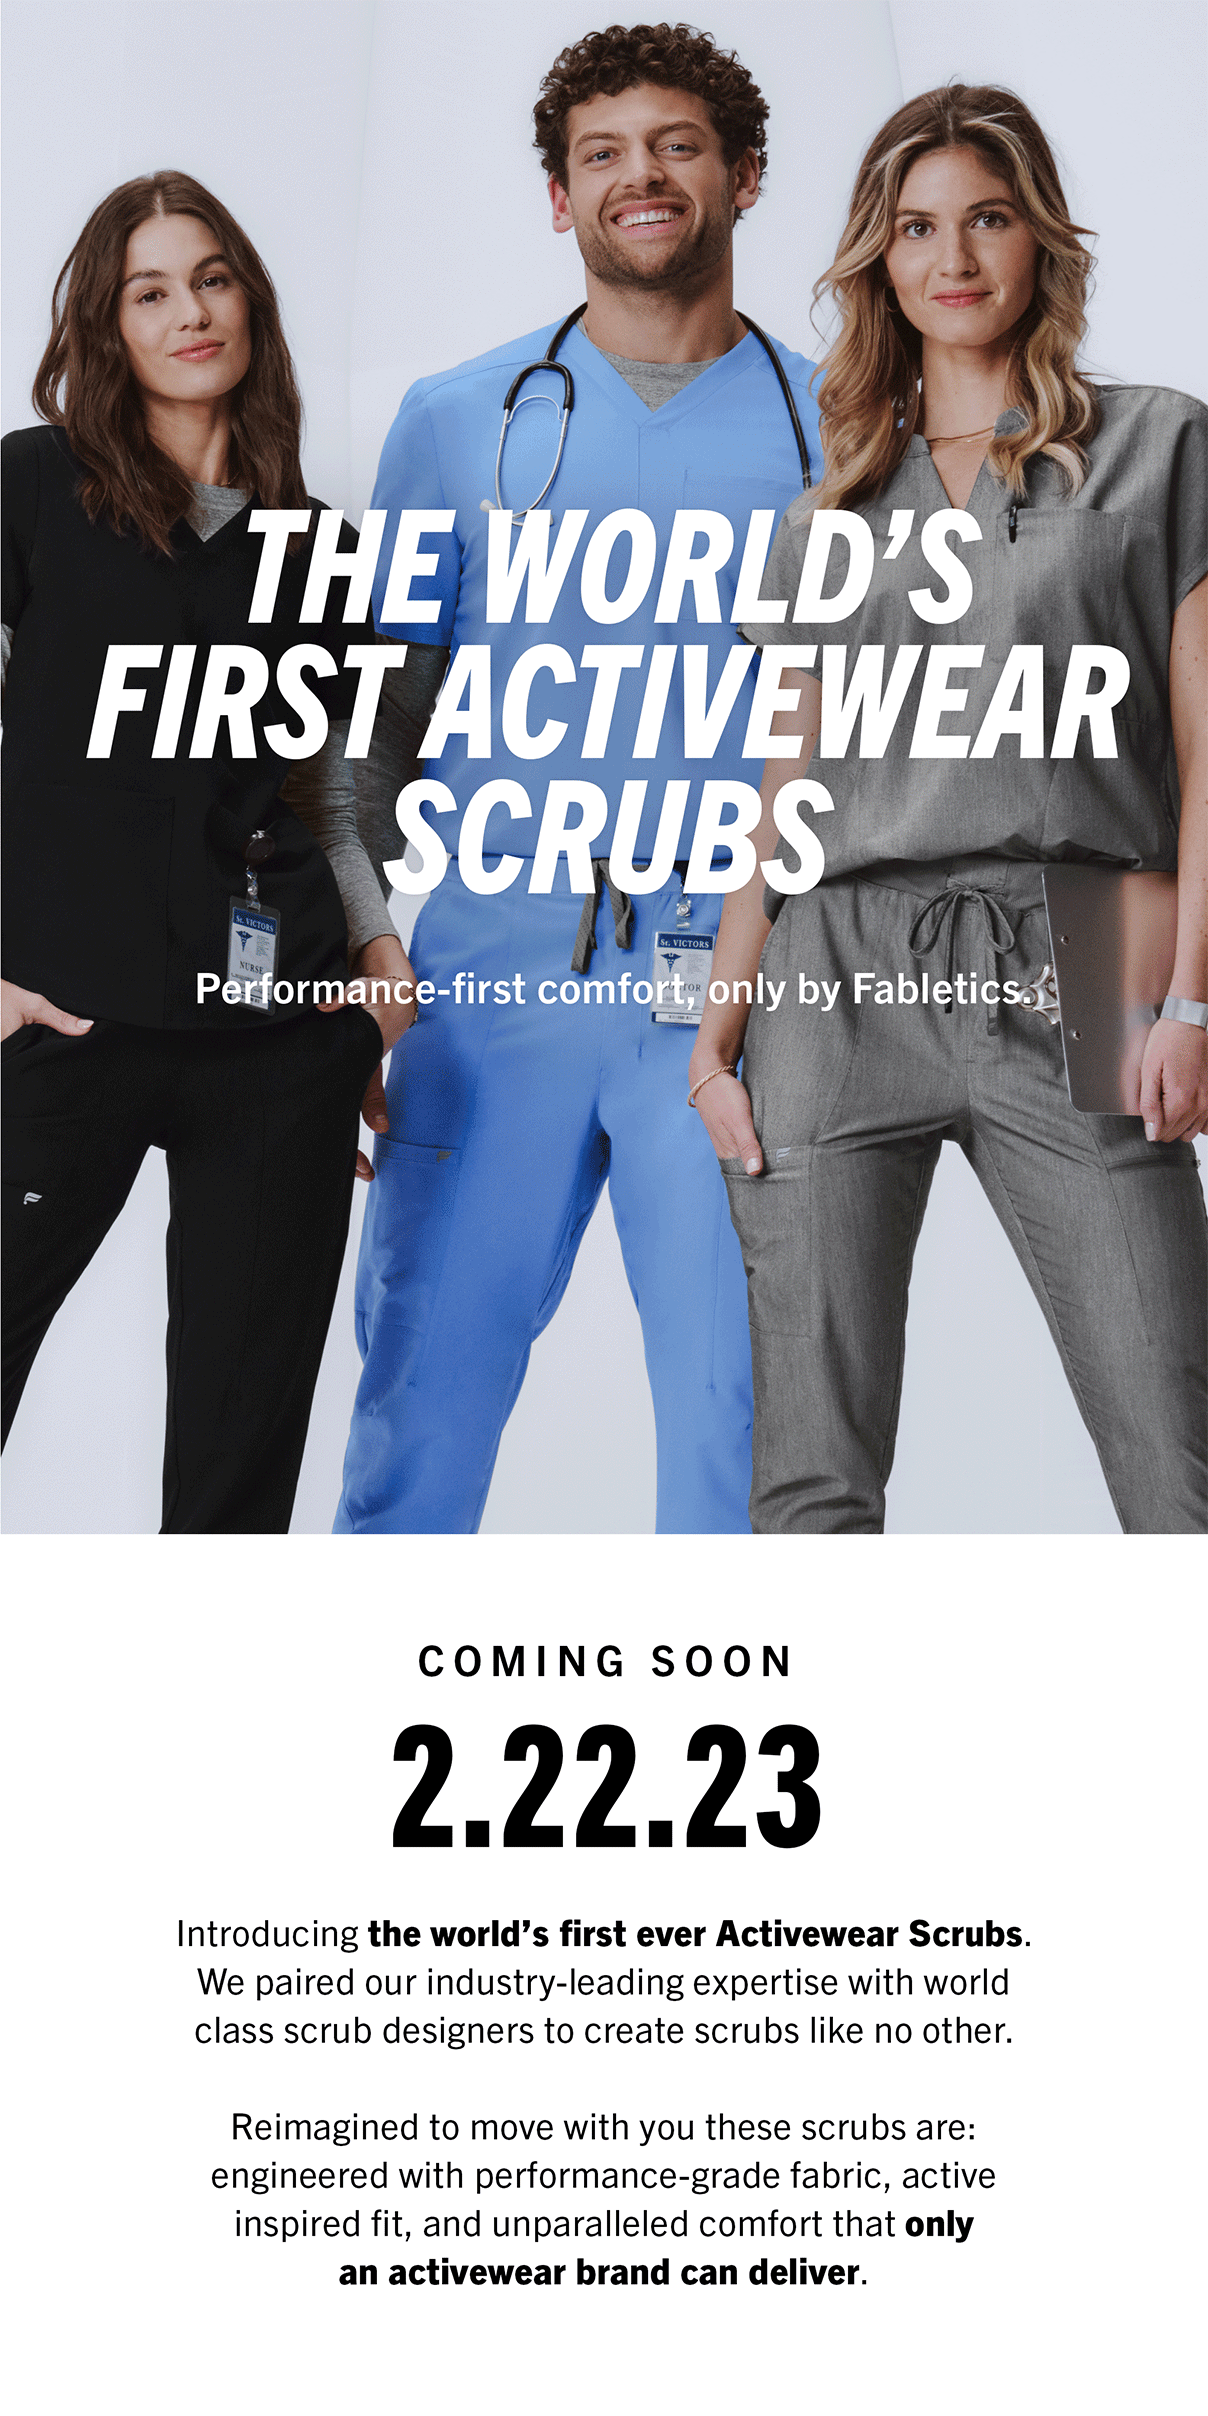 Take a look at our fabric guide! 👀 - Fabletics Email Archive